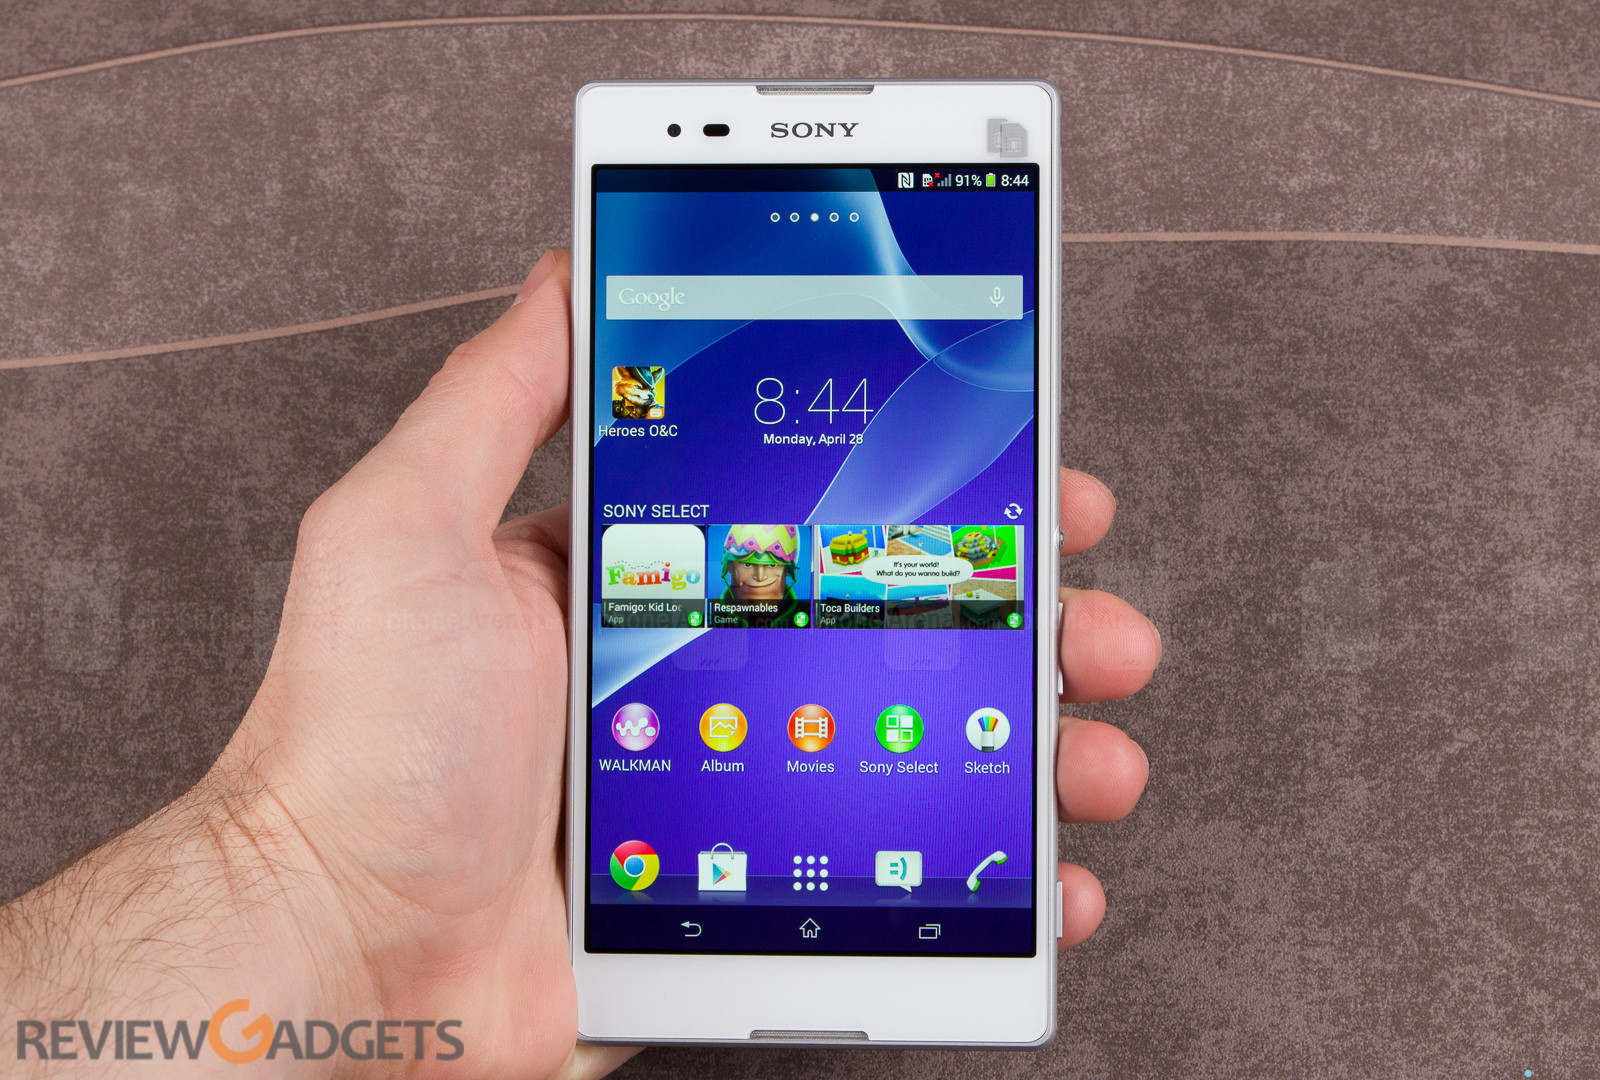 With the release of the new Sony Xperia T2 the company has tried to regain its customer base.